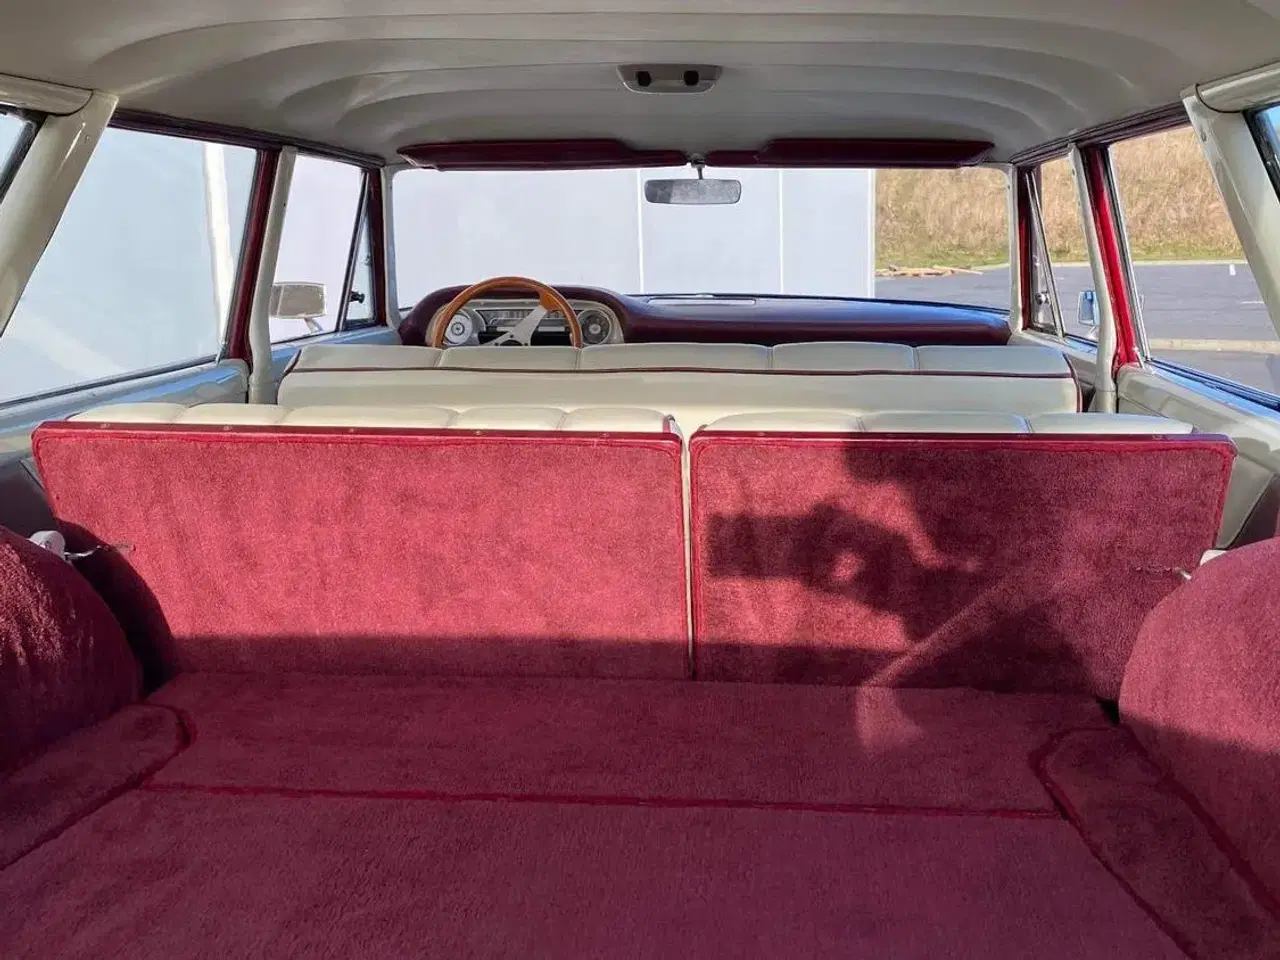 Billede 11 - 1963 Ford Galaxie Country Wagon